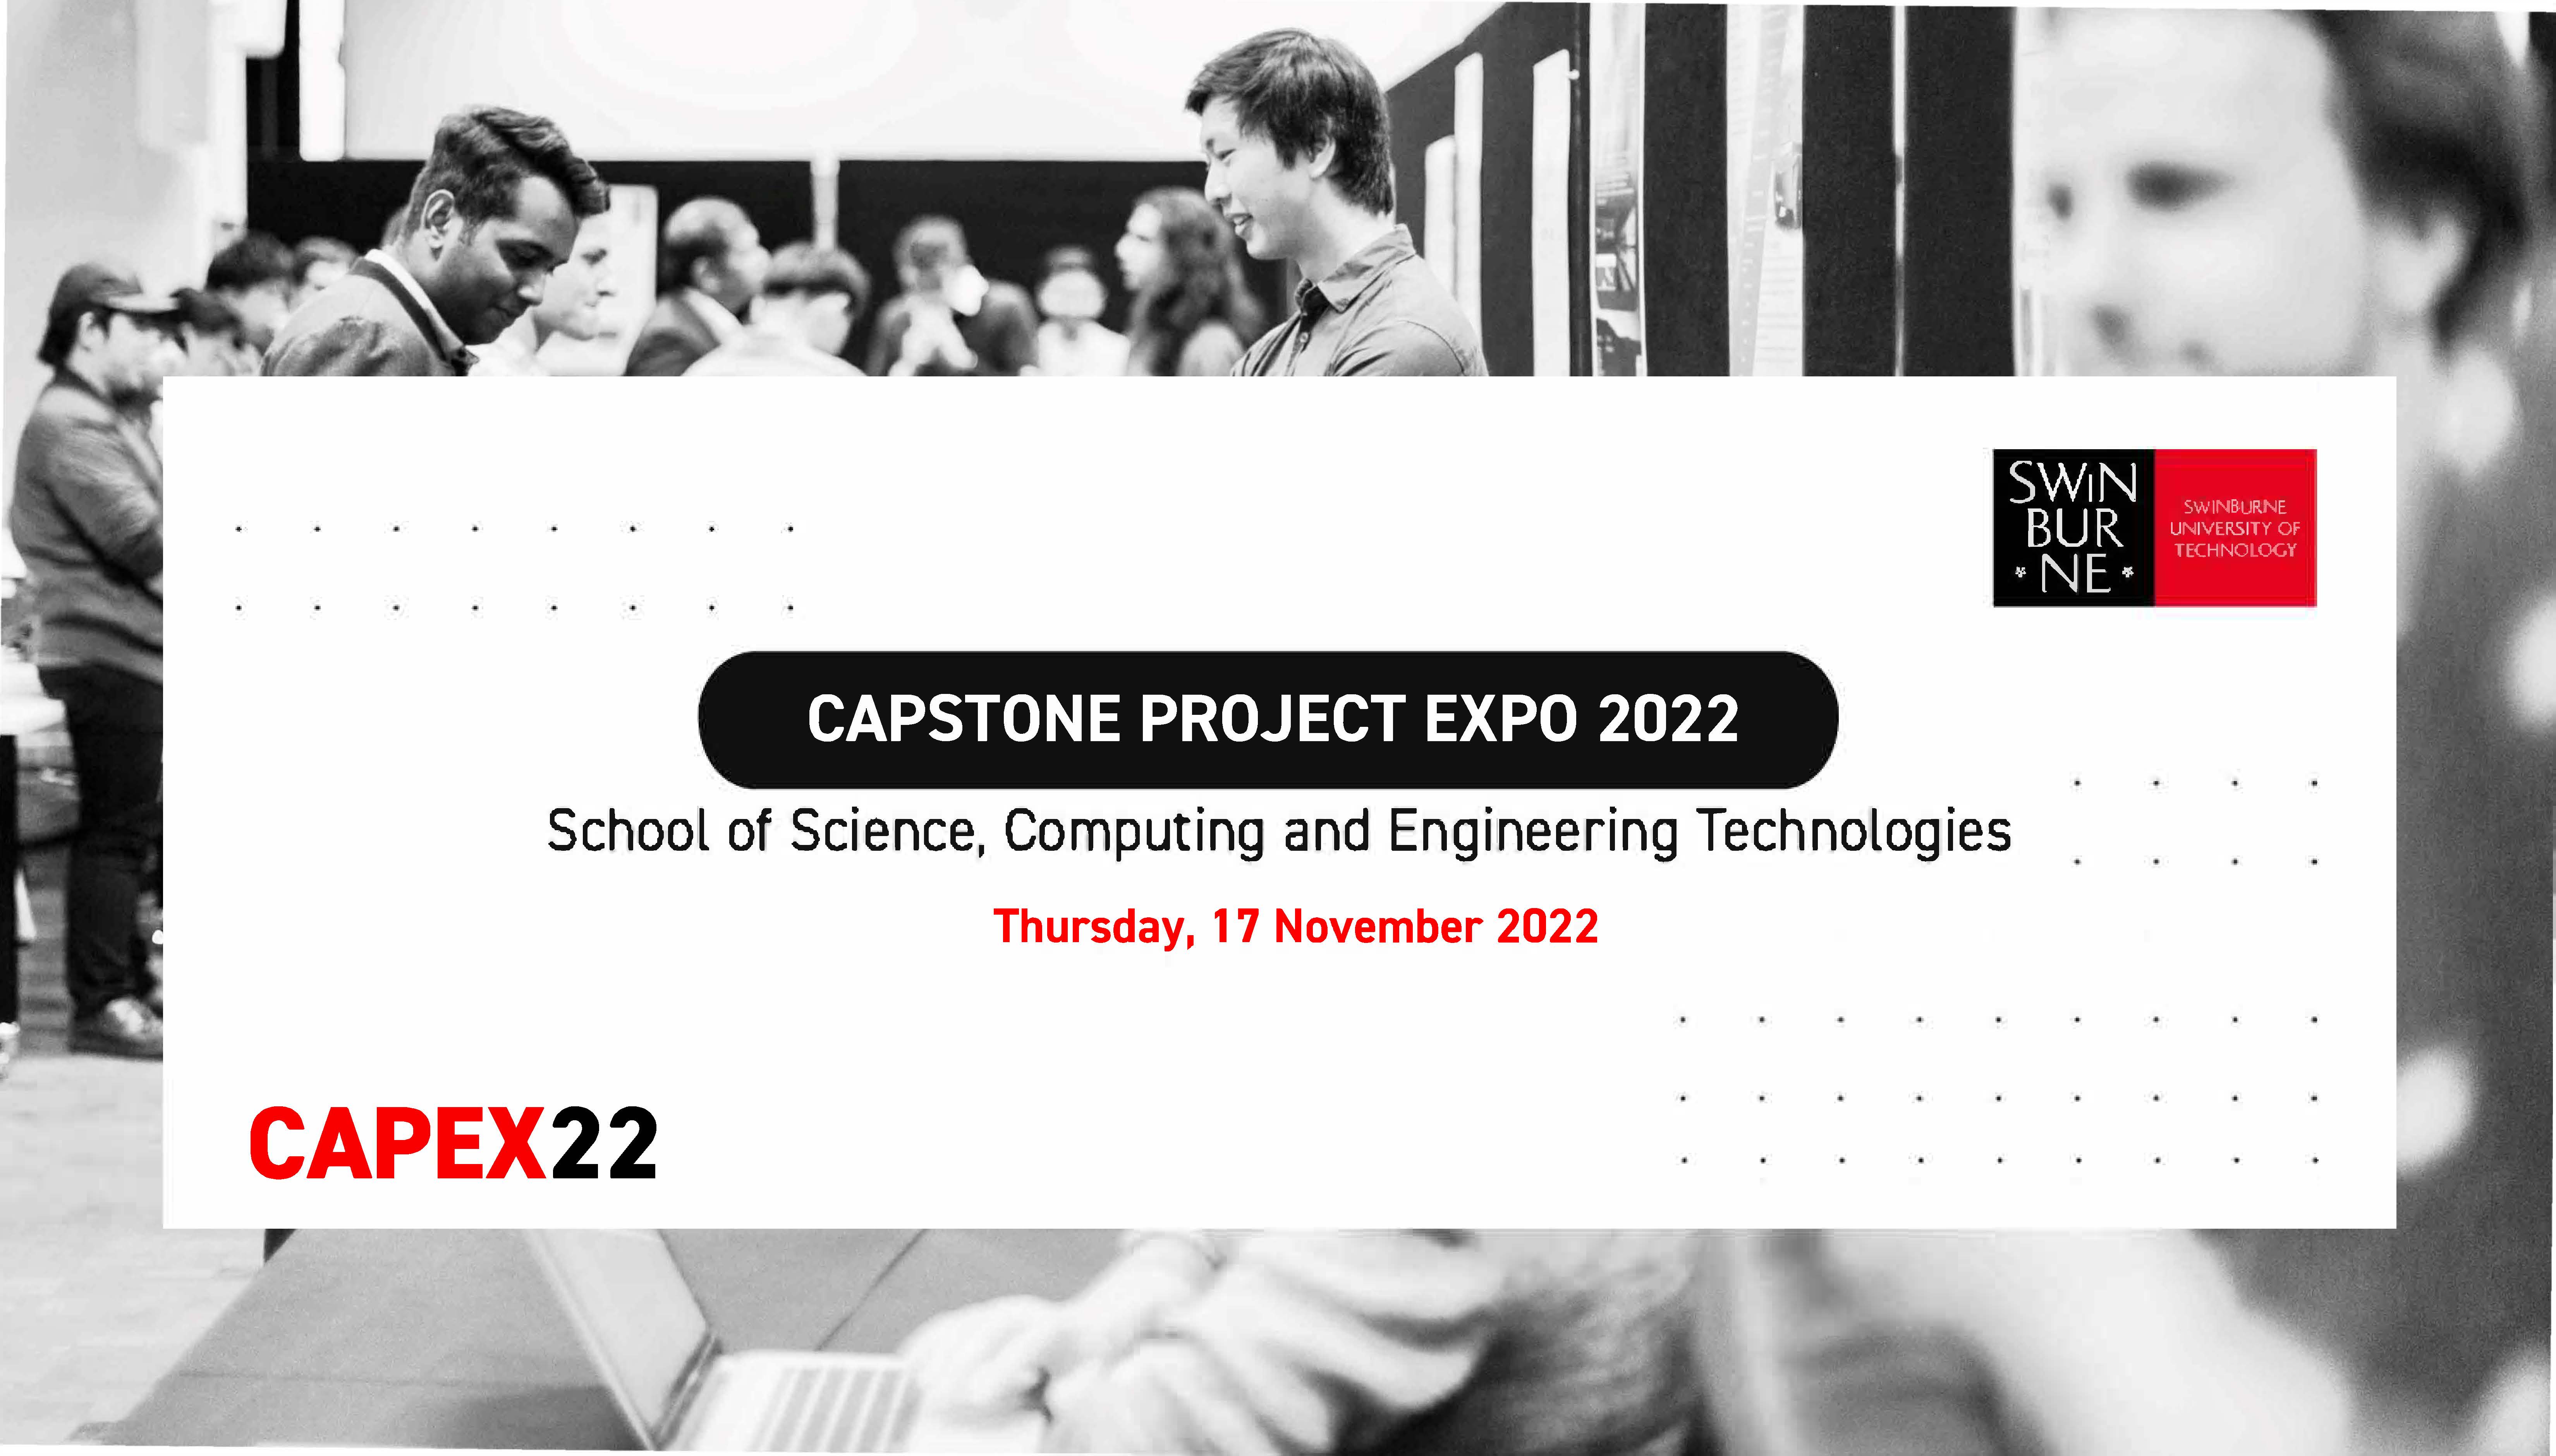 Black and white image of project exhibition obscured a white overlay  featuring the Swinburne logo, CAPEX22 logo and event information